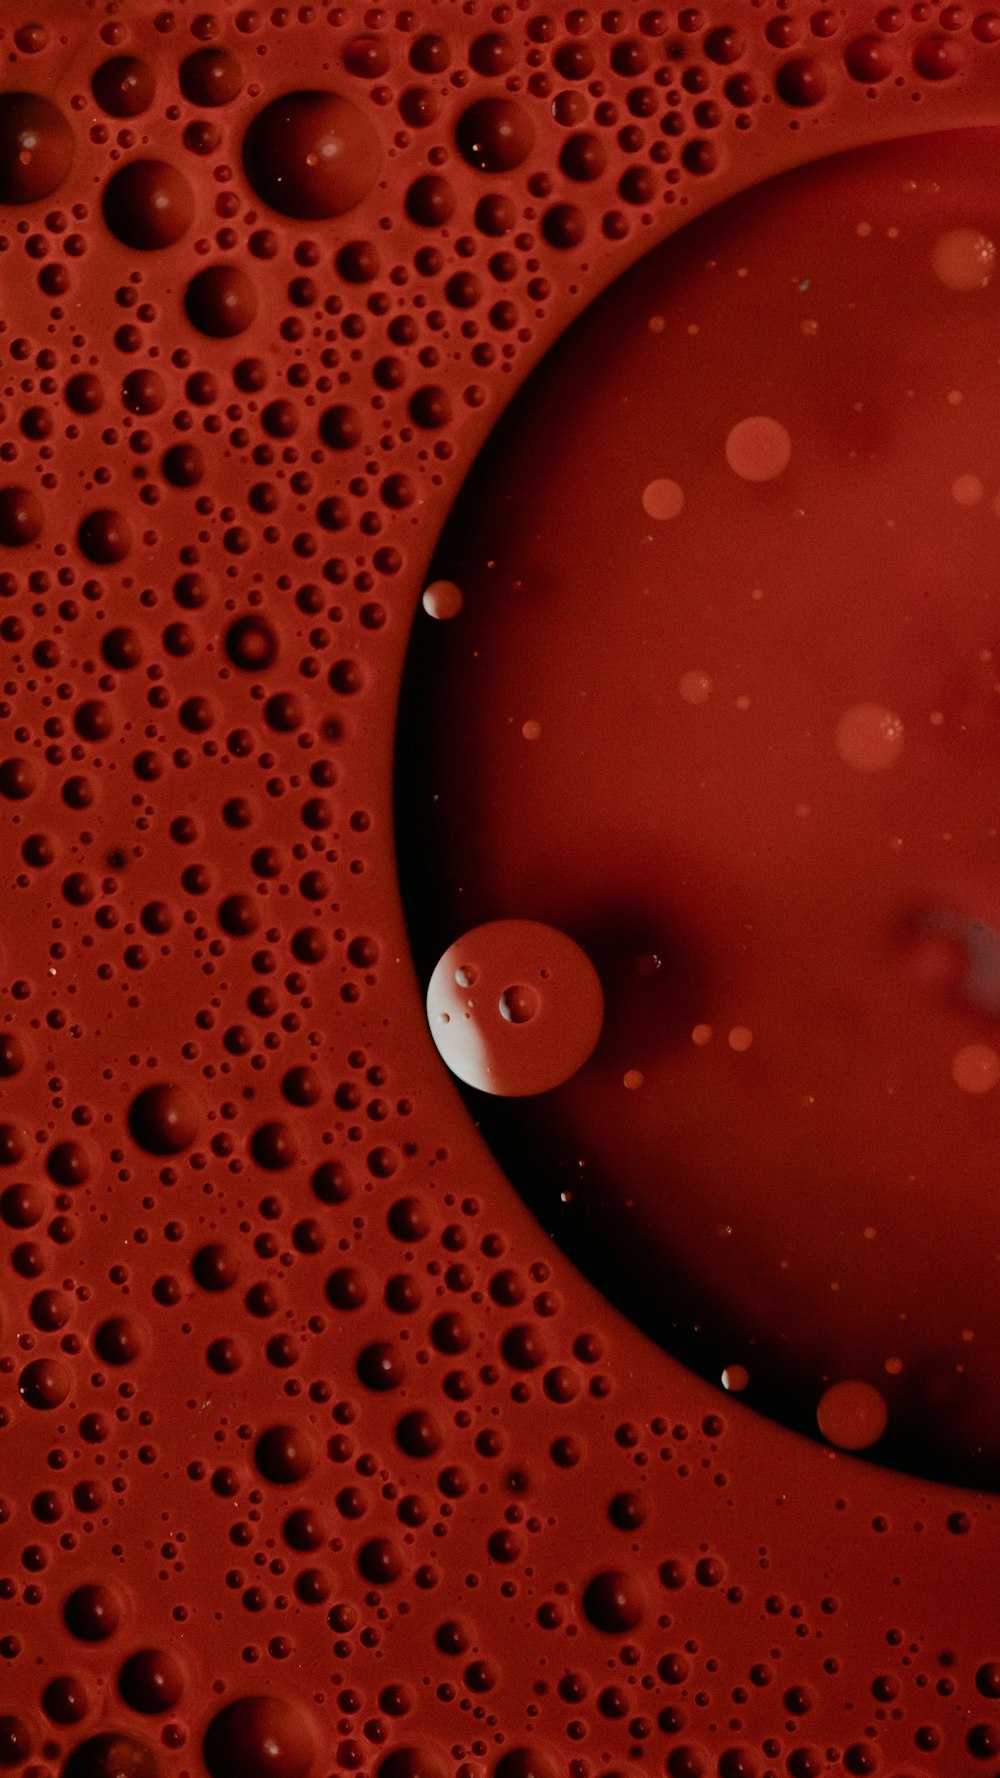 a close up of a red substance with drops of water